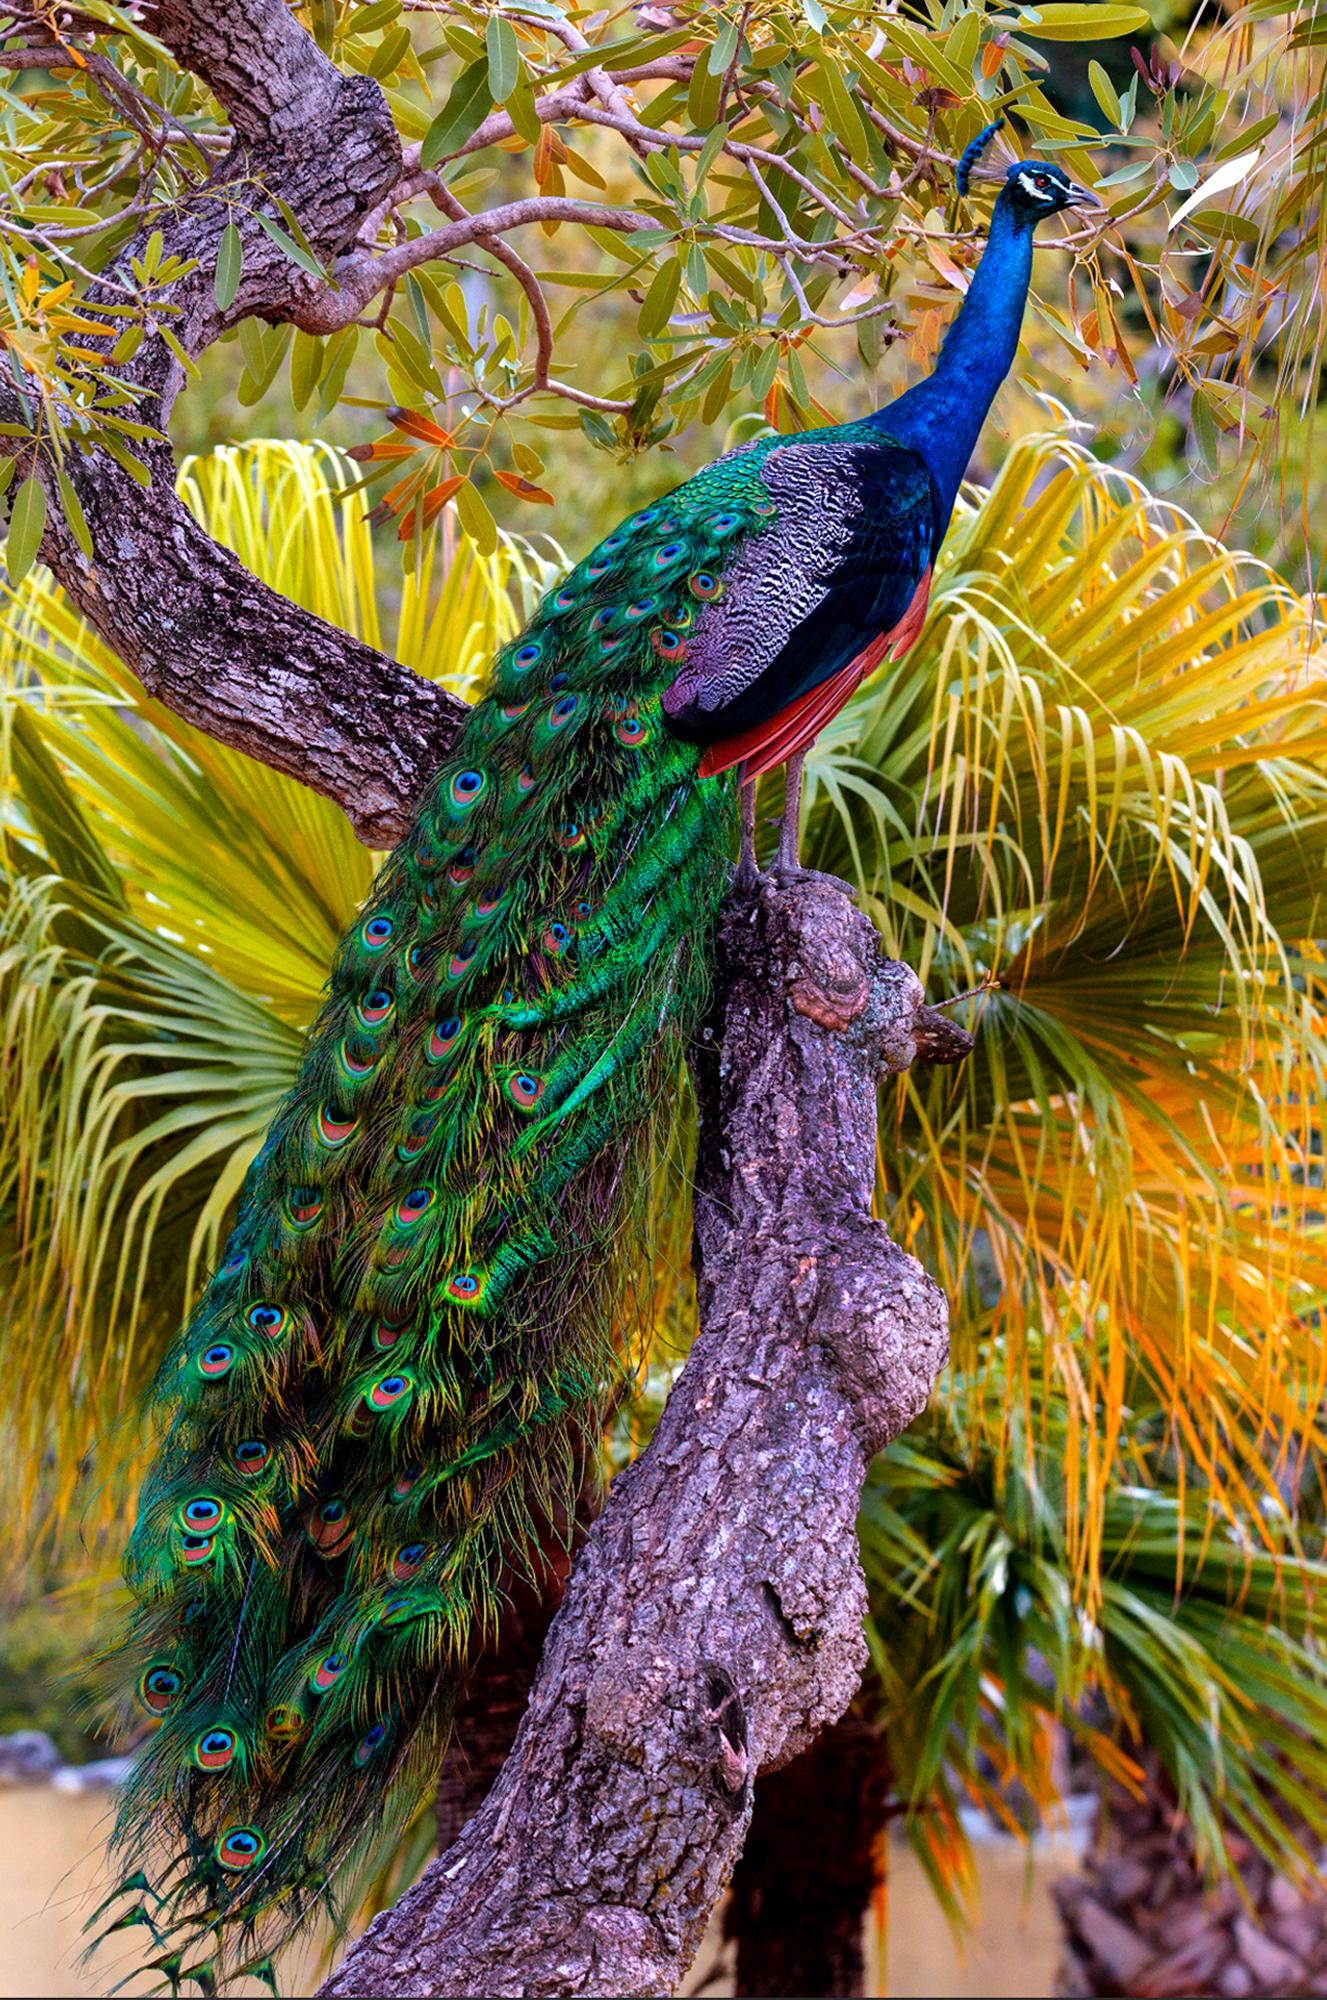 Robert Funk Portrait Photograph - Peacock in Tree with  Iridescent Blue and Green Plumage